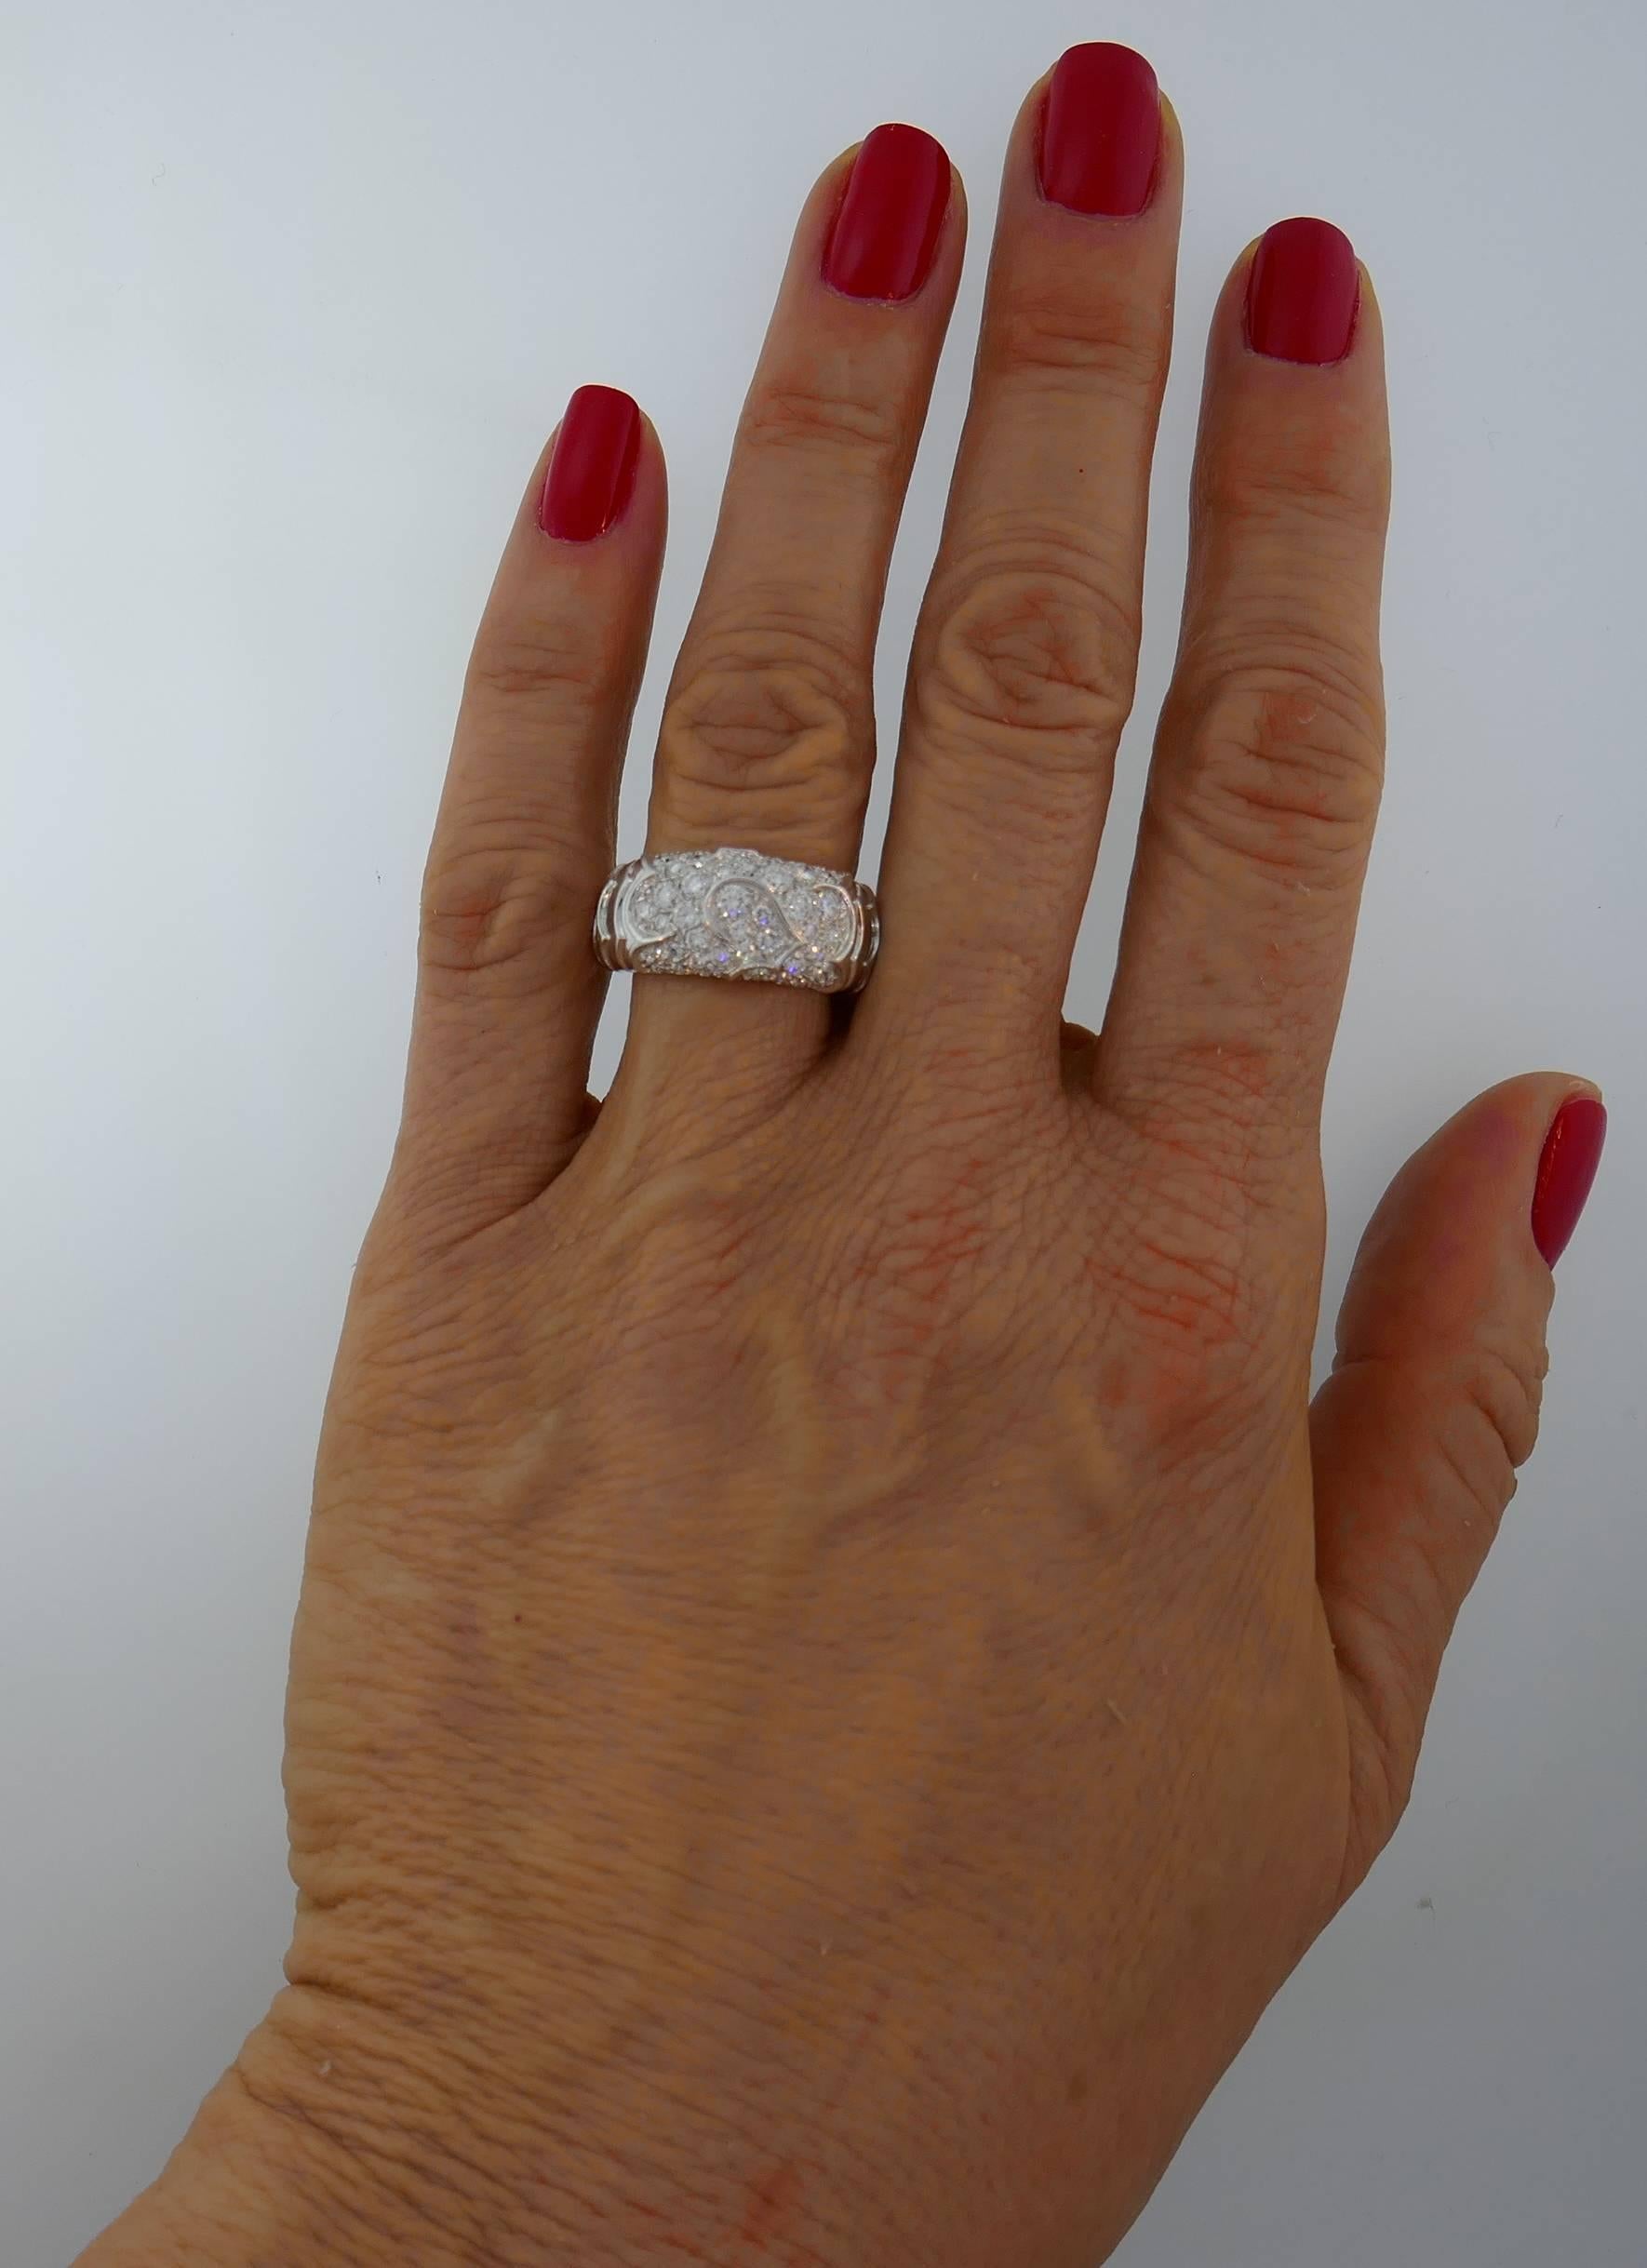 Elegant, timeless and wearable ring that is a great addition to your jewelry collection. Created by Marina B in Italy in the 1980's, the ring is made of 18 karat white gold and set with round brilliant cut diamonds (F-G color, VS clarity, total